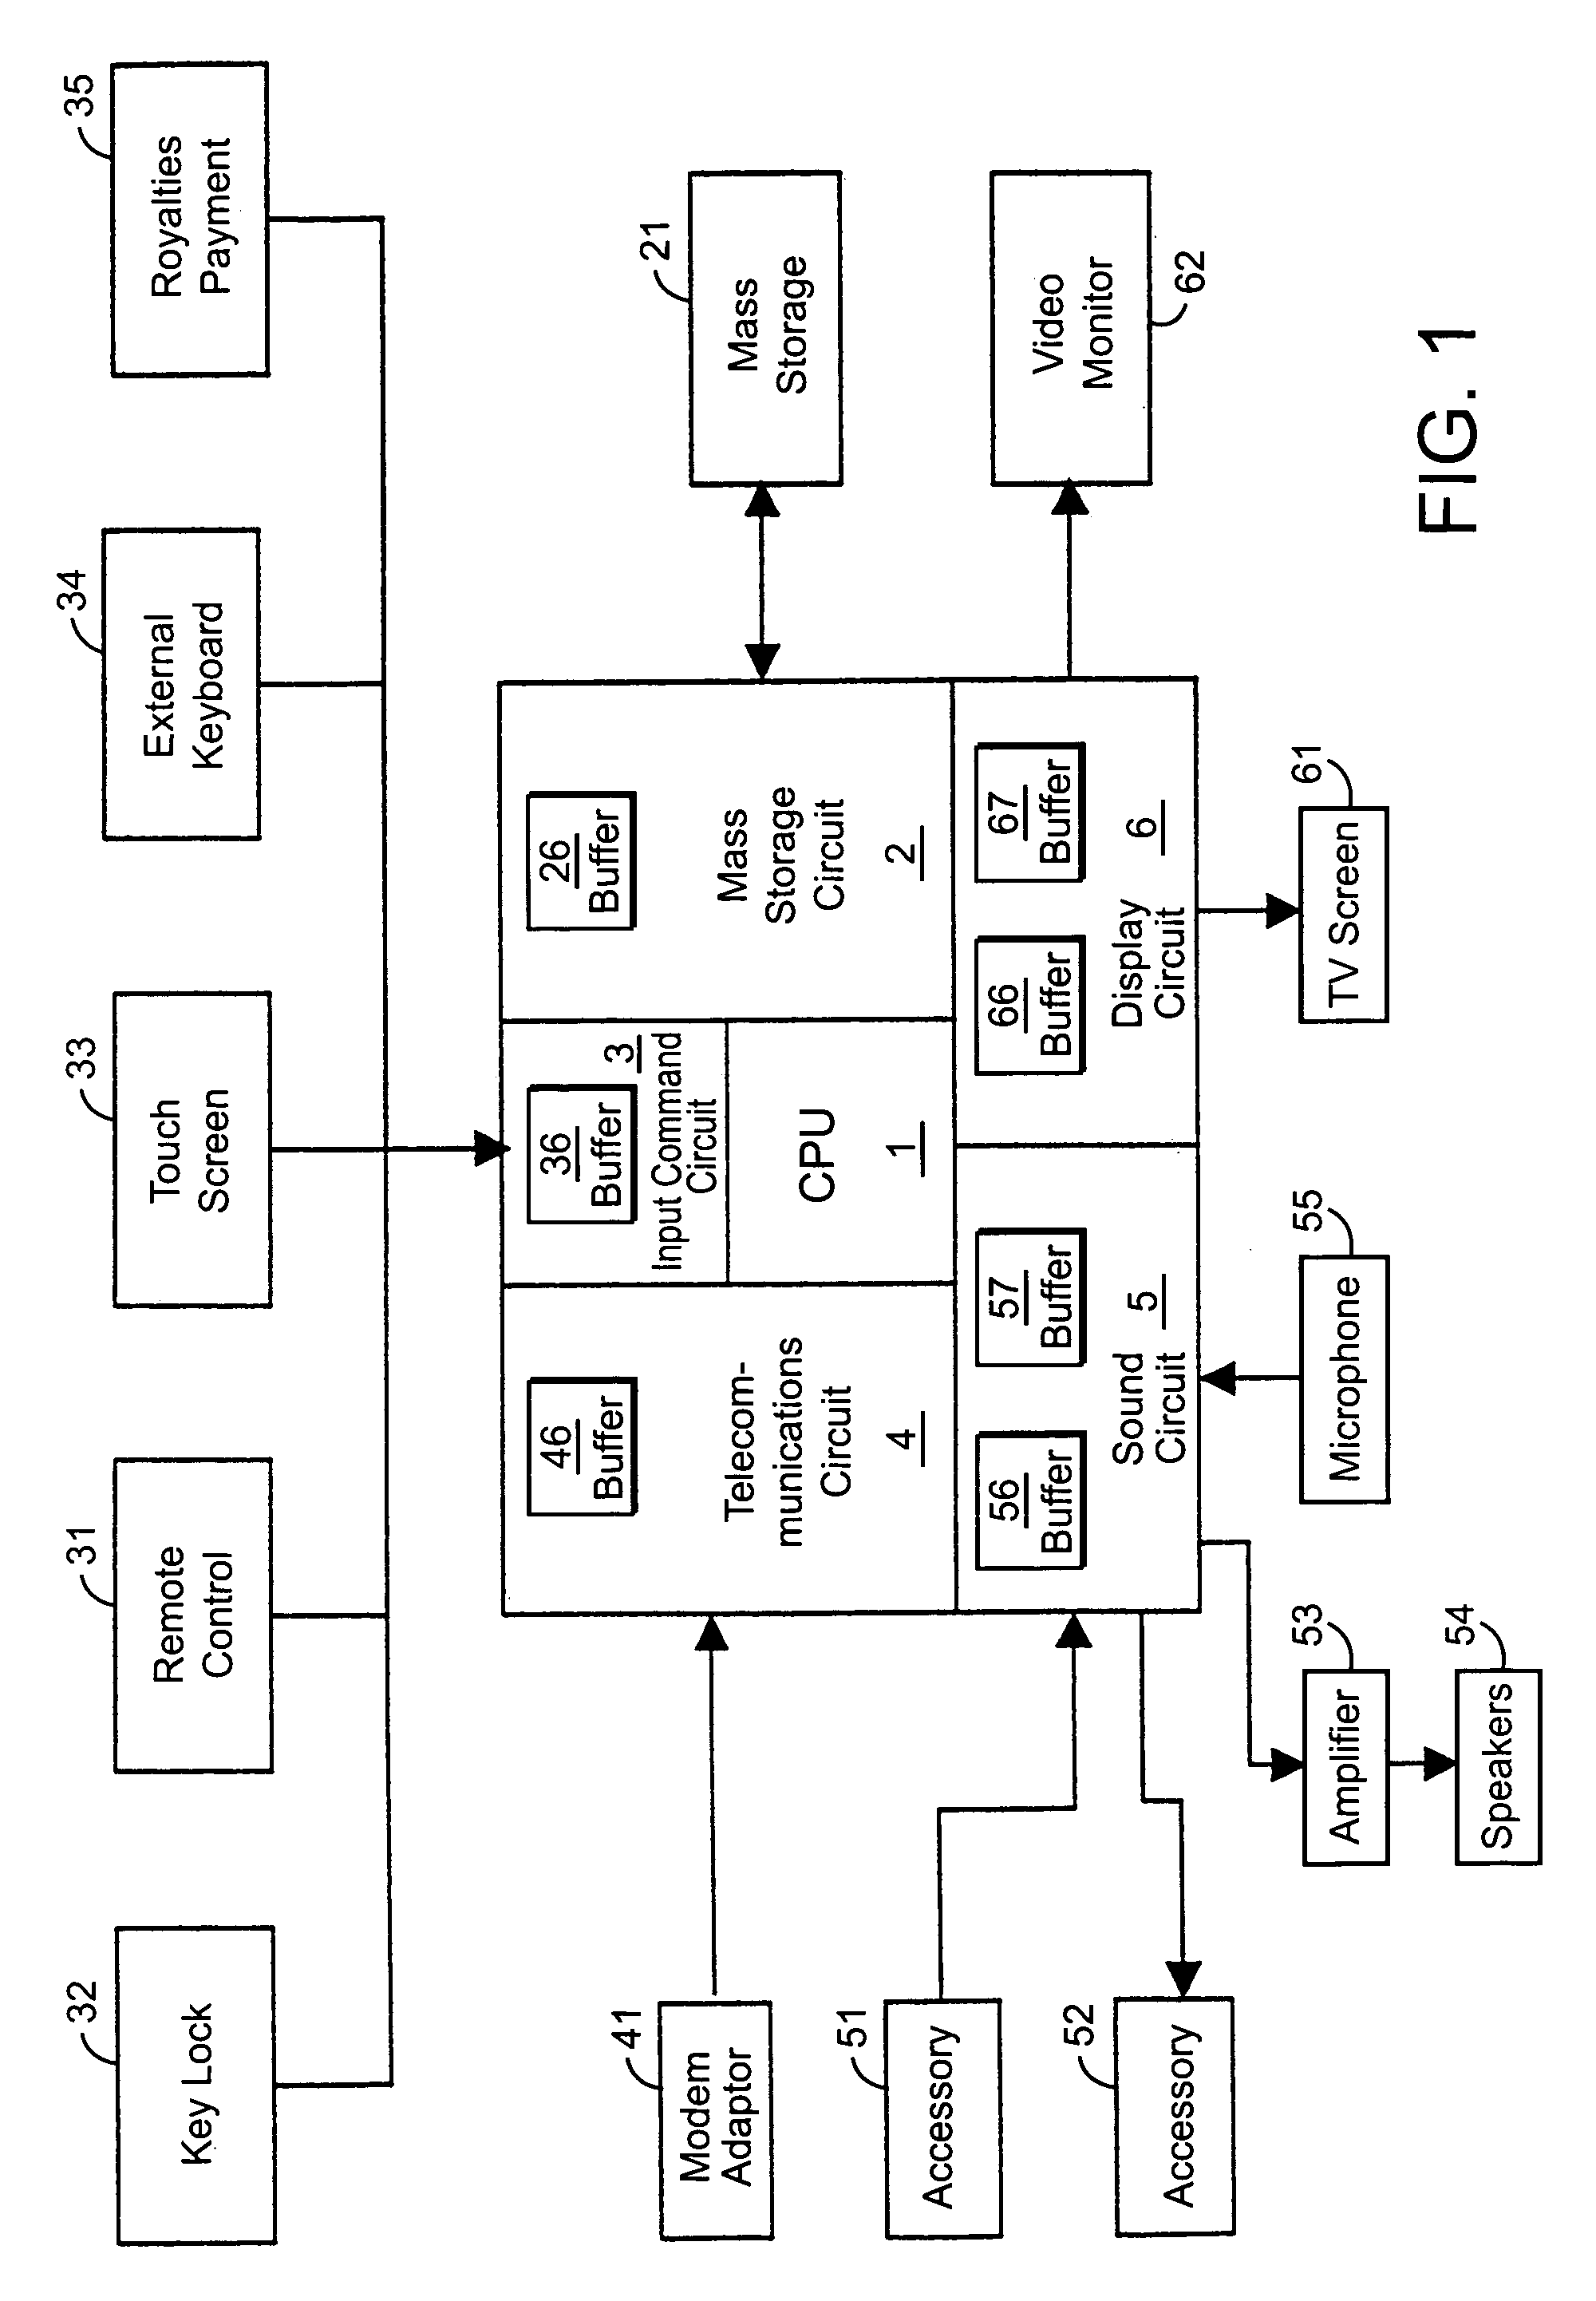 System for remote loading of objects or files in order to update software